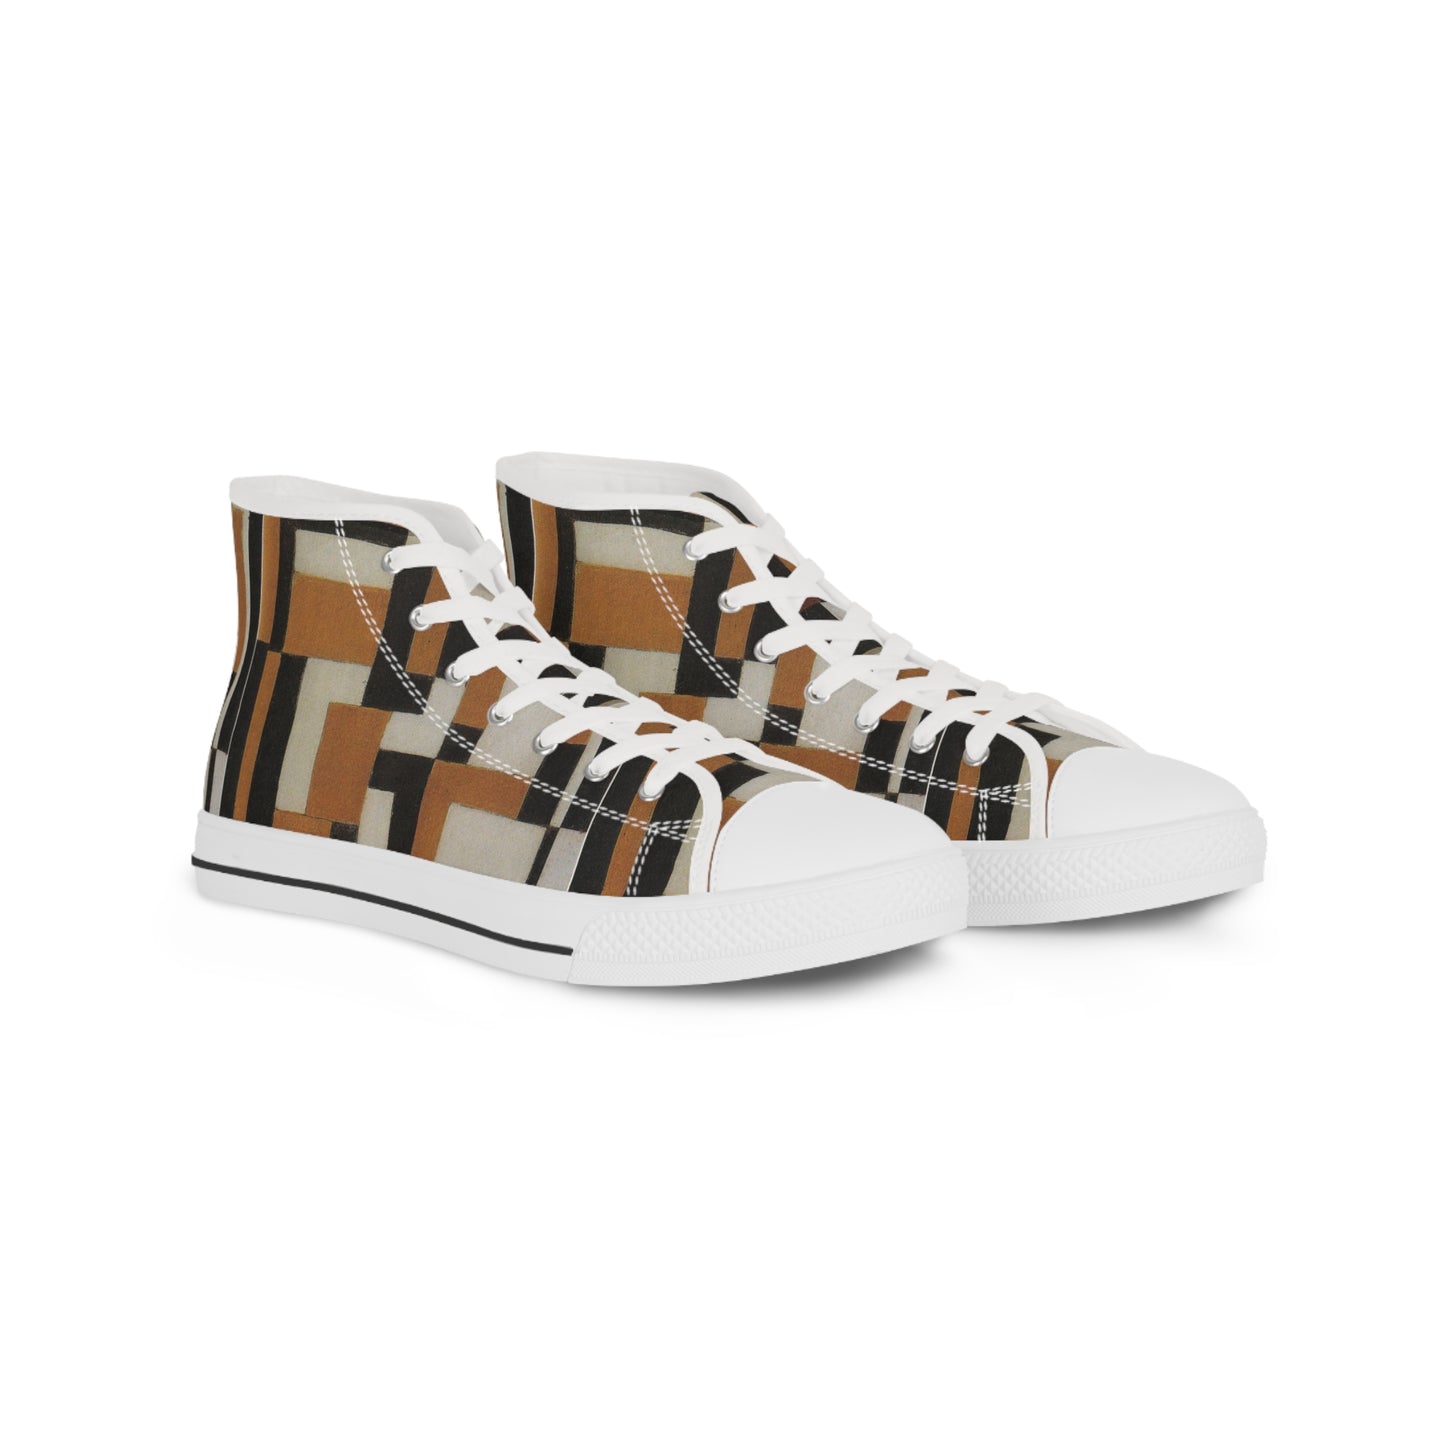 THEO VAN DOESBURG - COMPOSITION - HIGH TOP SNEAKERS FOR HIM 